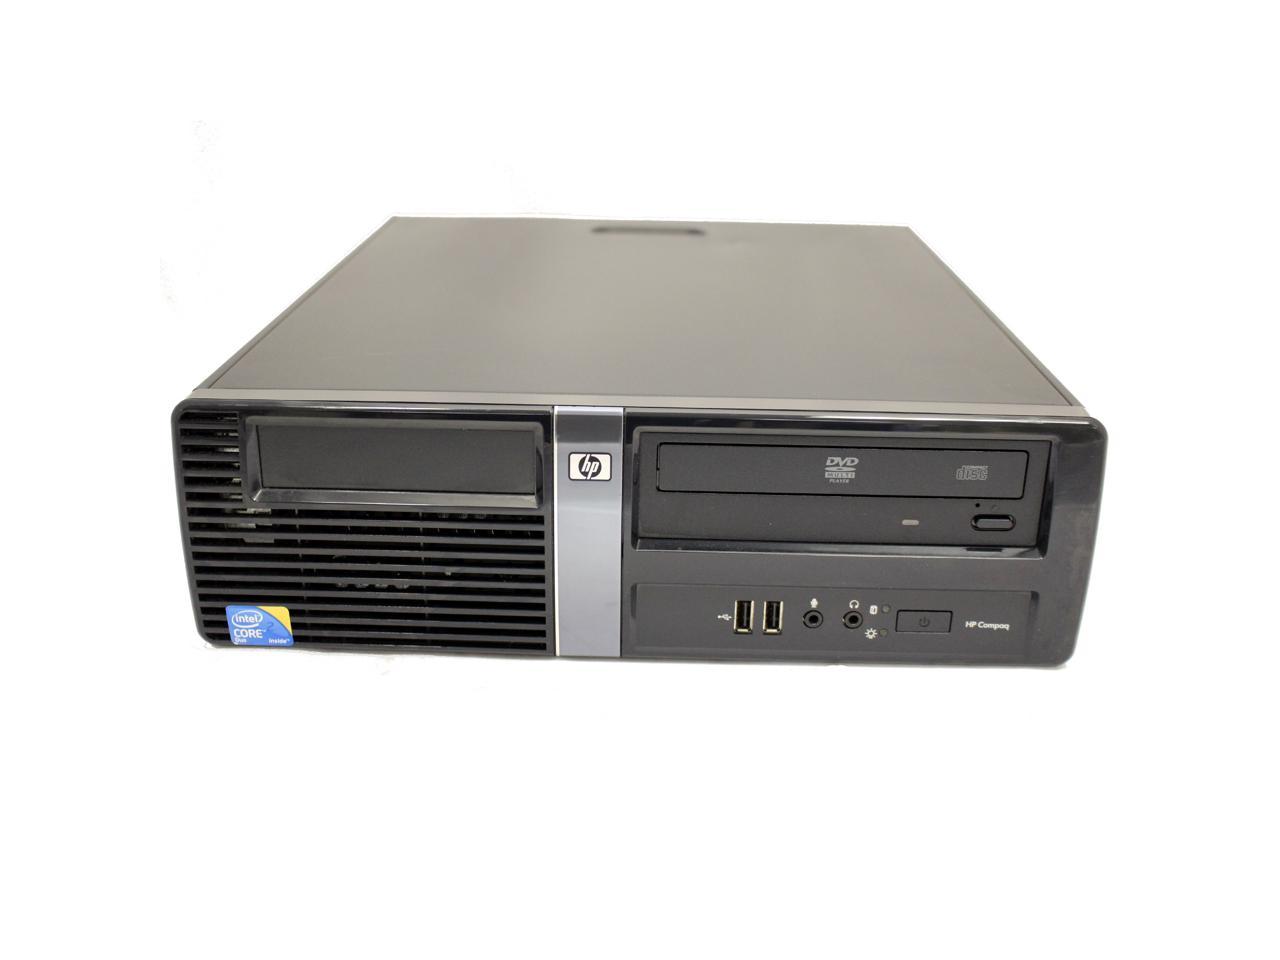 The Memory Kit comes with Life Time Warranty. 4GB Team High Performance Memory RAM Upgrade For HP 2GBx2 Compaq dx7500 Business PC Desktop 